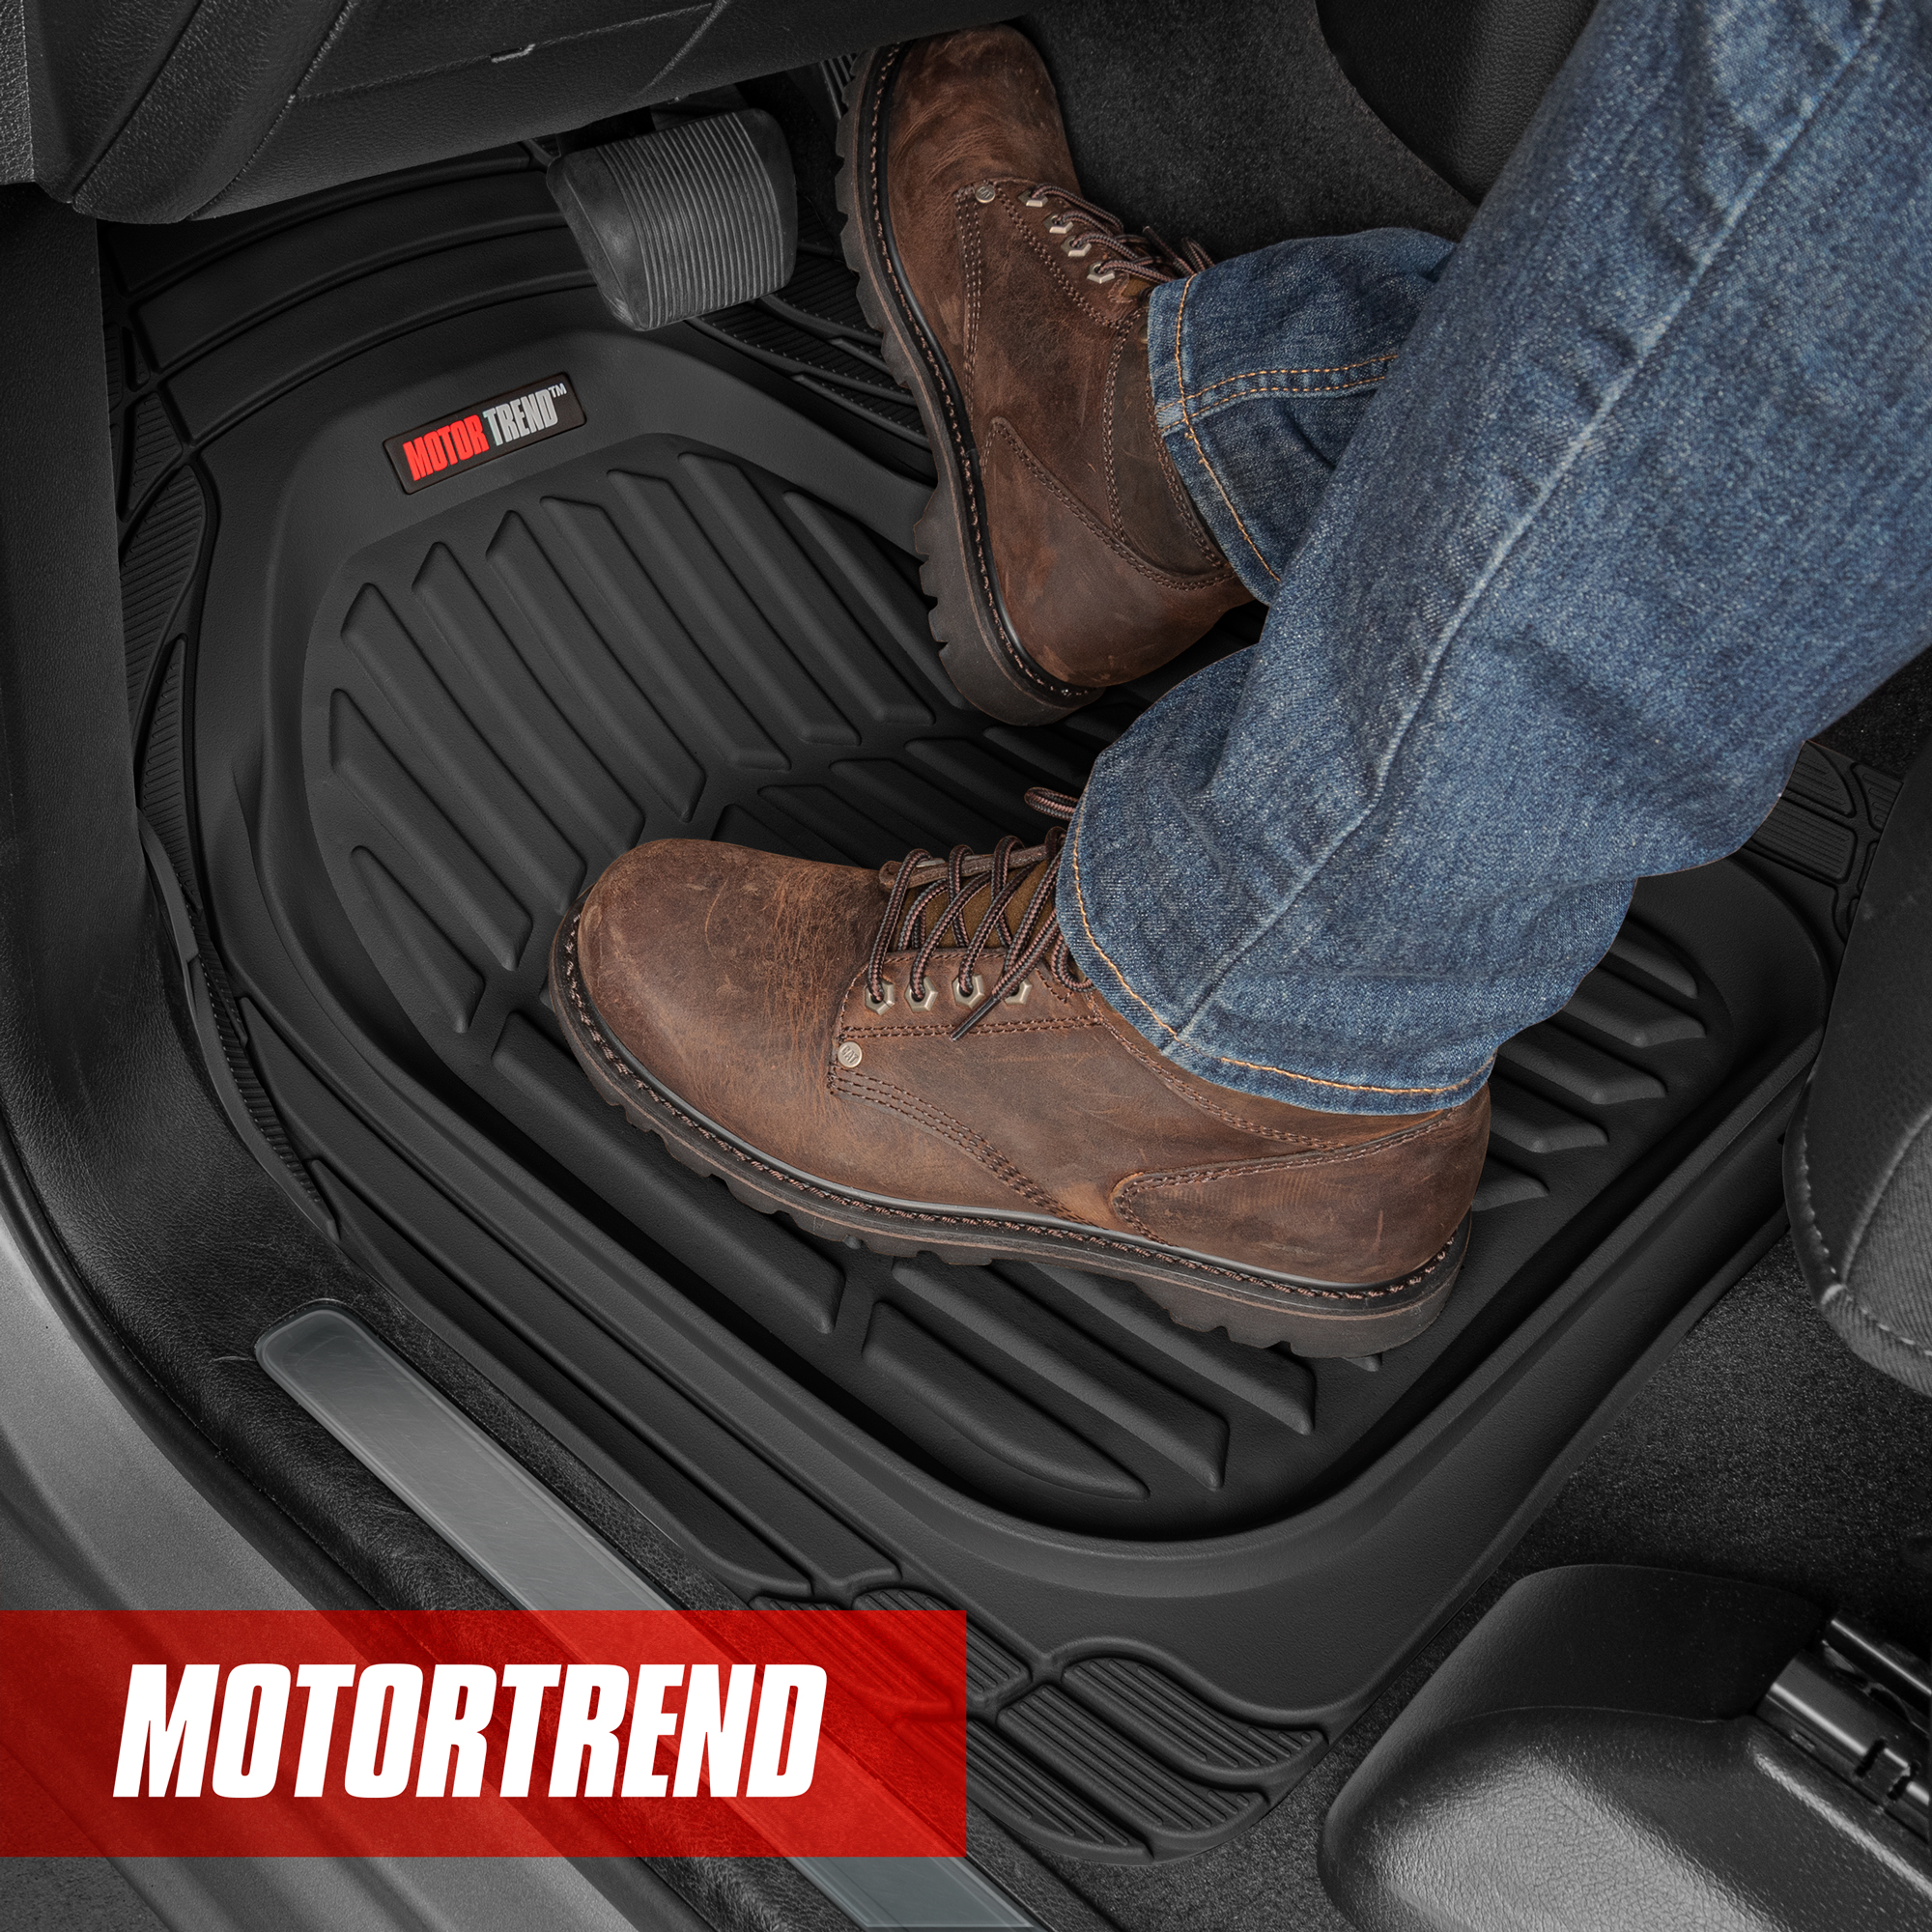 MotorTrend FlexTough Tortoise, Heavy-Duty Rubber Floor Mats for All Weather  Protection, Deep Dish